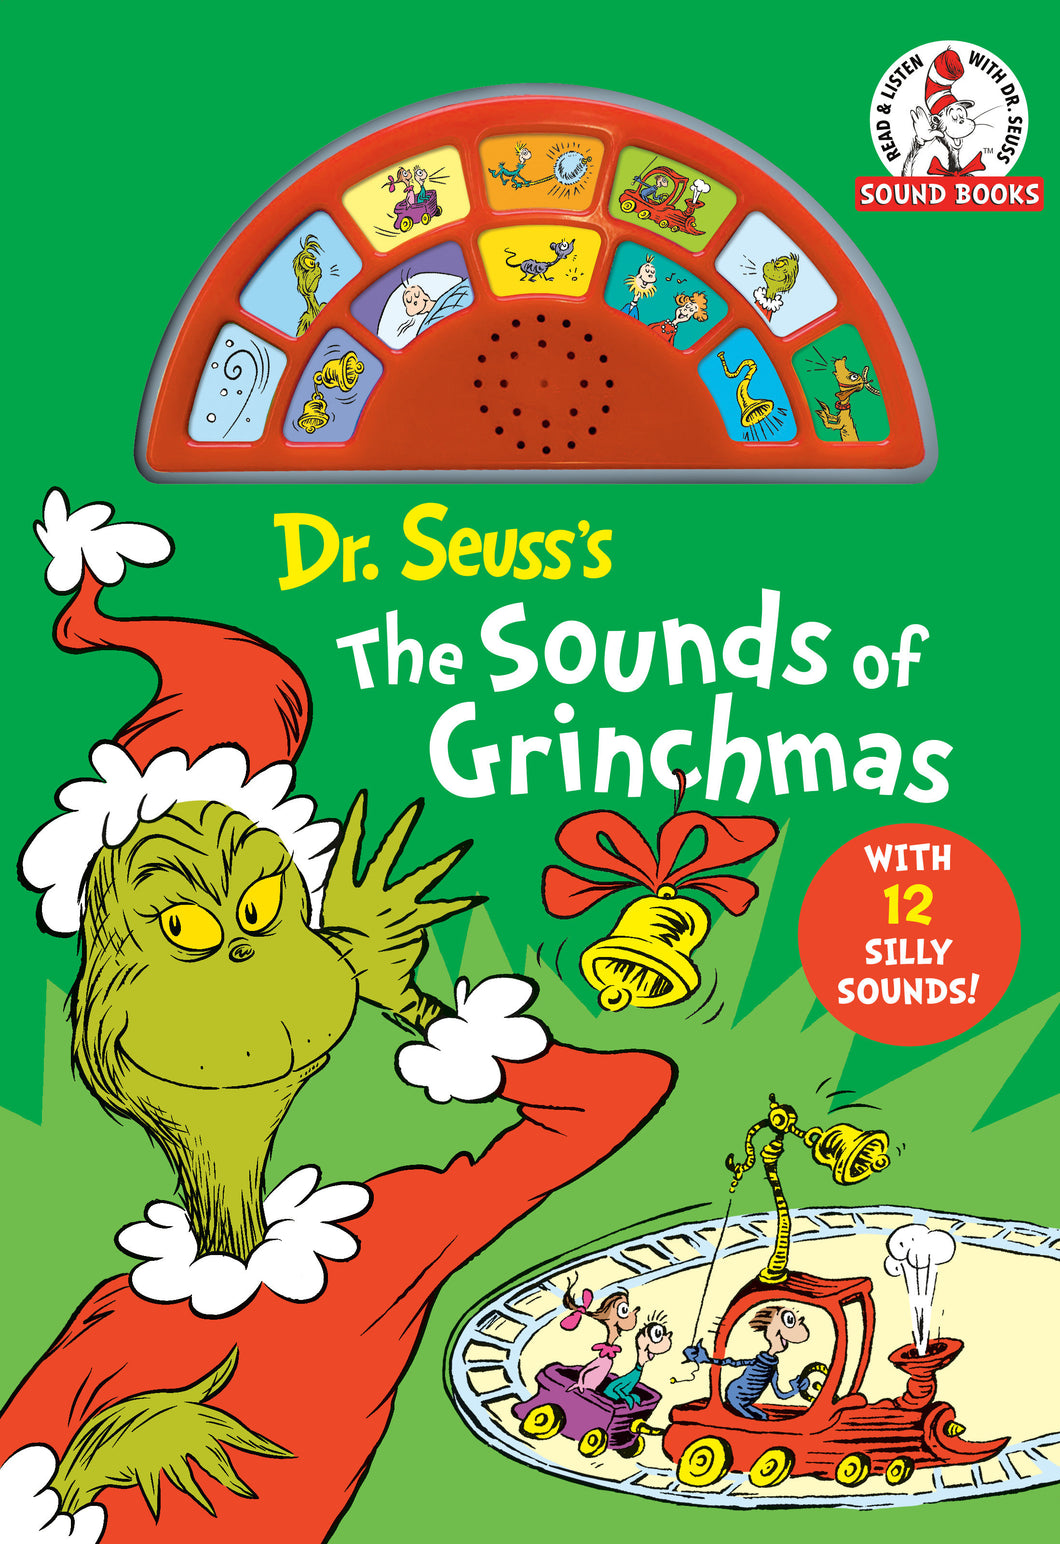 Dr Seuss's The Sounds of Grinchmas: An Interactive Book with 12 Silly Sounds!